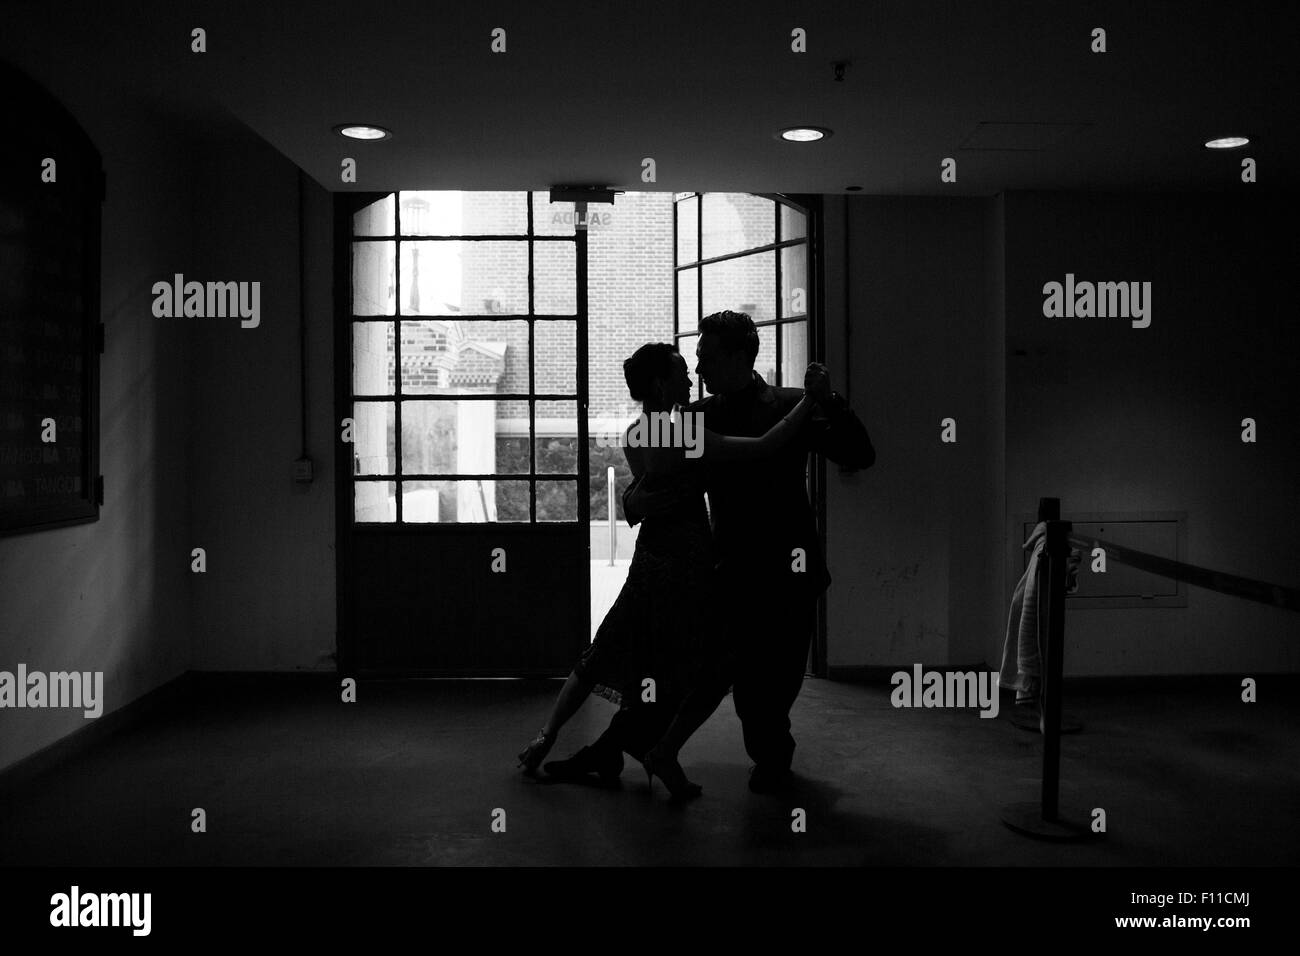 (150825) -- BUENOS AIRES, Aug. 25, 2015 (Xinhua) -- Chinese dancer Ping Yu and her Ukrainian partner Sergiy Podbolotnyy rehearse in the backstage before their participation in the semifinals of the Tango World Cup, in Buenos Aires city, capital of Argentina, on Aug. 24, 2015. Tango is sweeping across Argentina's borders, taking Asia, especially China, by storm. This year's key competitive event, the 2015 Tango Festival and World Cup, which is being held Aug. 14 to 27 in Argentina's capital Buenos Aires, features couples from around the globe, including a Ukrainian/Chinese couple. Ukrainian-bor Stock Photo